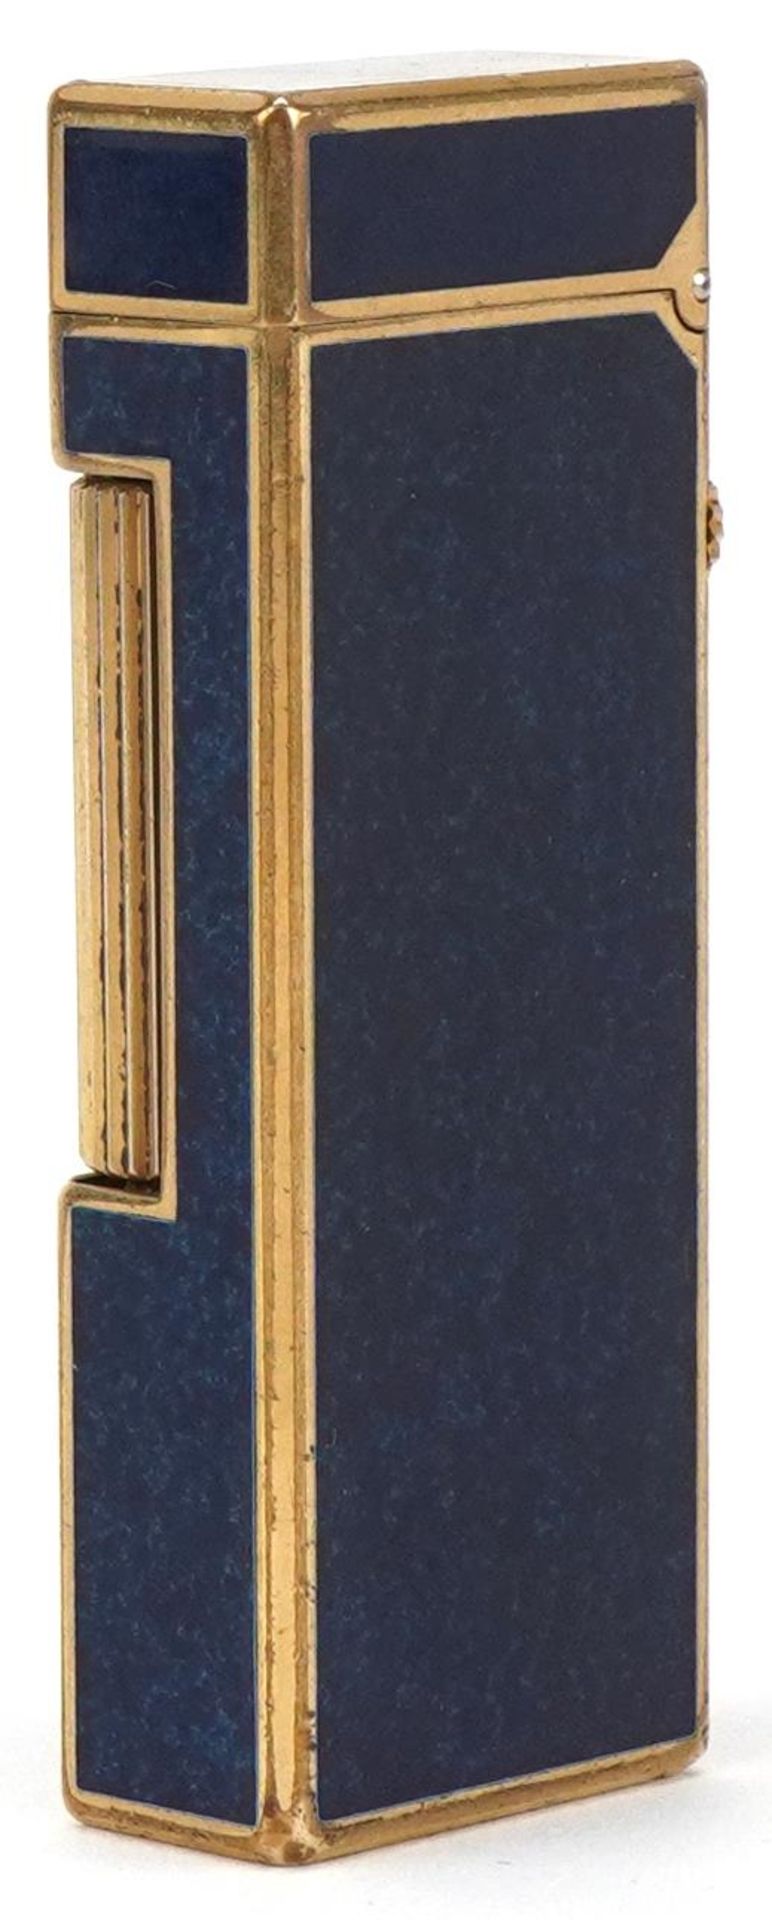 Vintage Dunhill gold plated lapis lazuli pocket lighter with case - Image 2 of 4